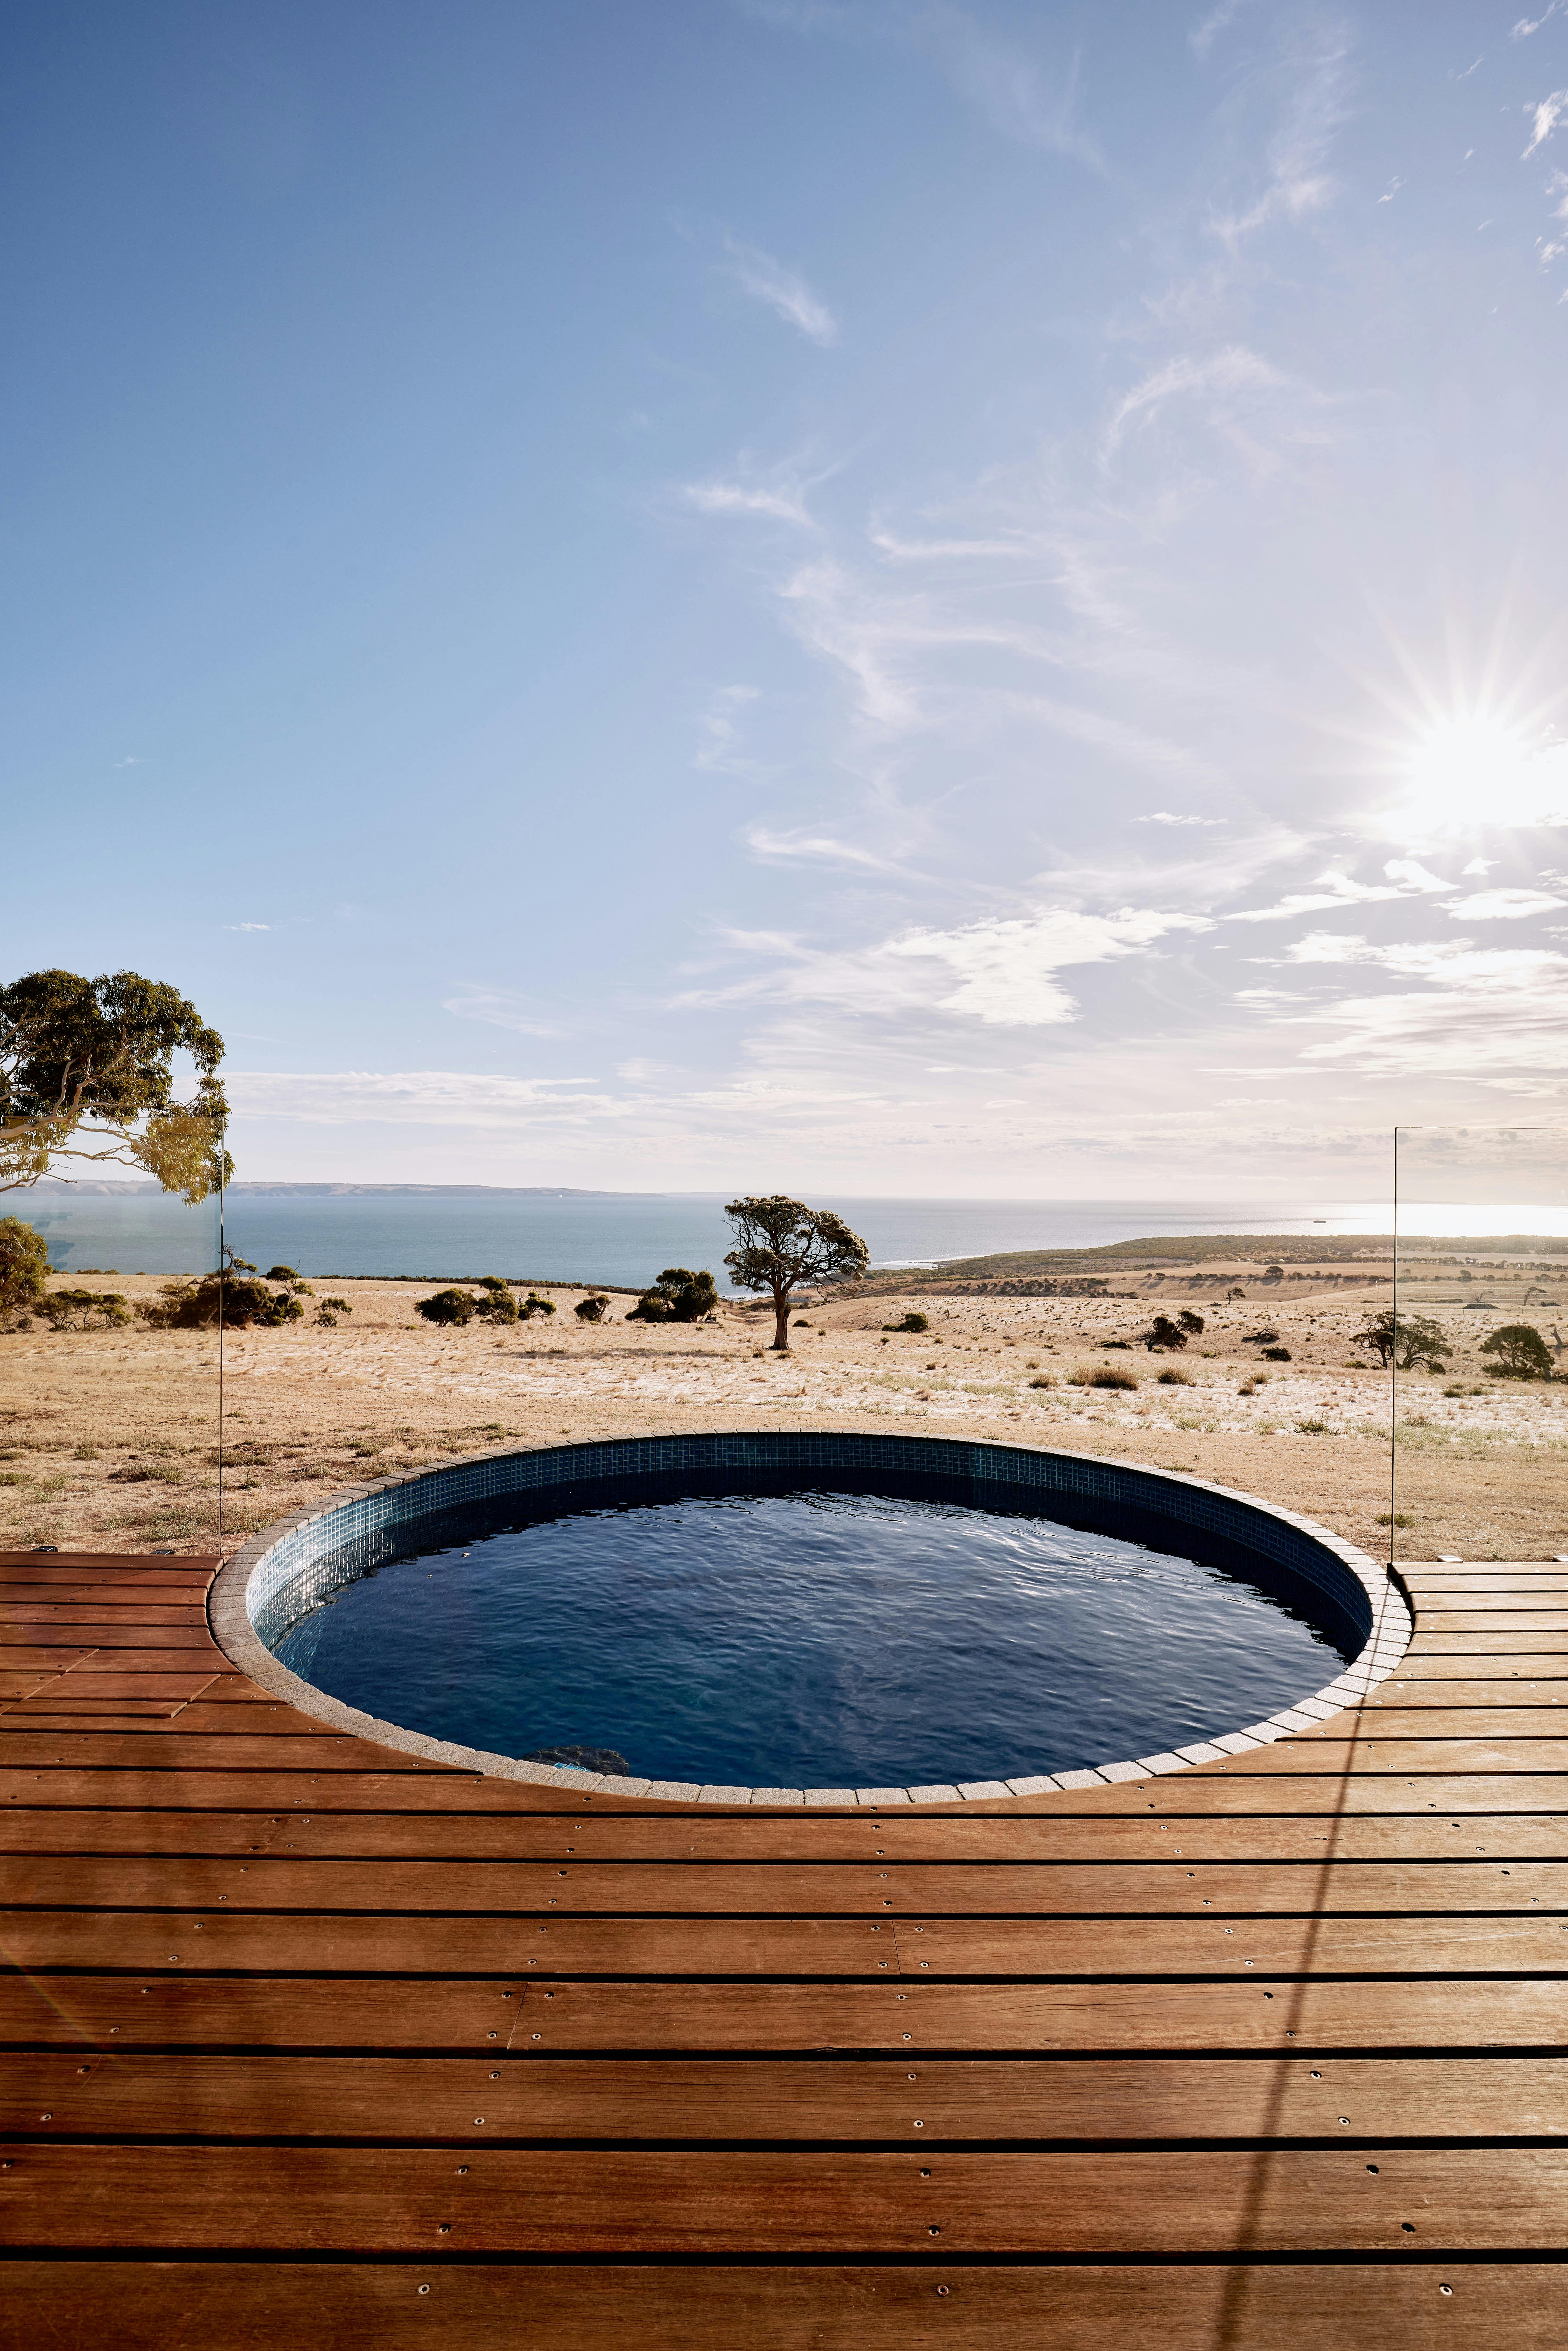 The pool overlooking the farm and the ocean with Kangaroo Island in the distance